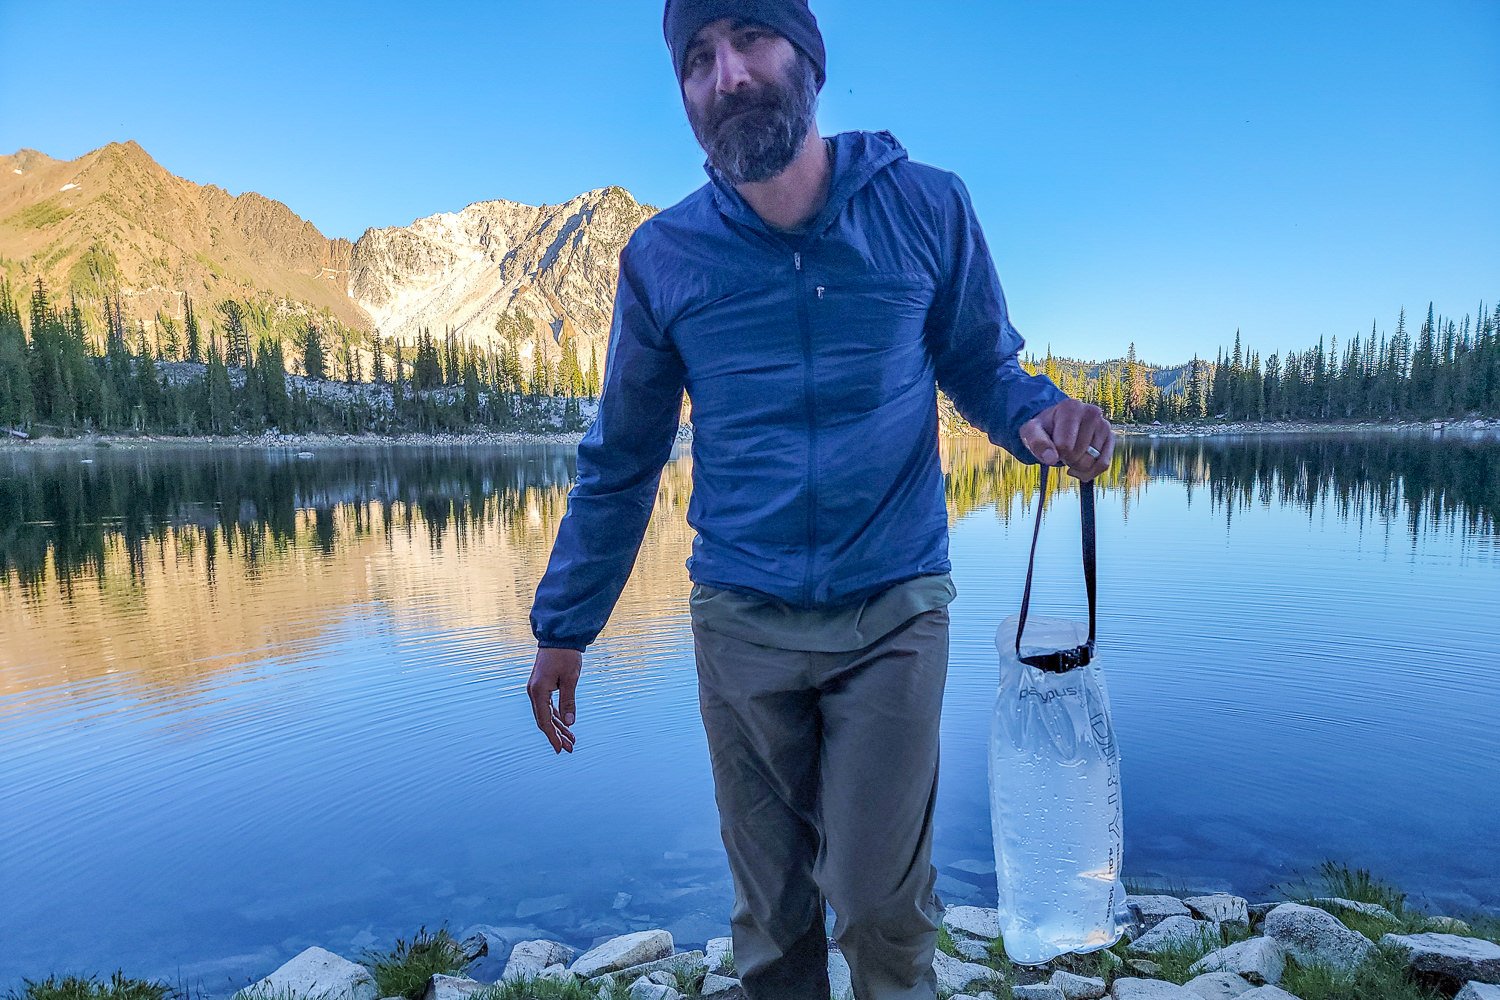 A backpacker carrying the Platypus GravityWorks Water Filter back from a lake